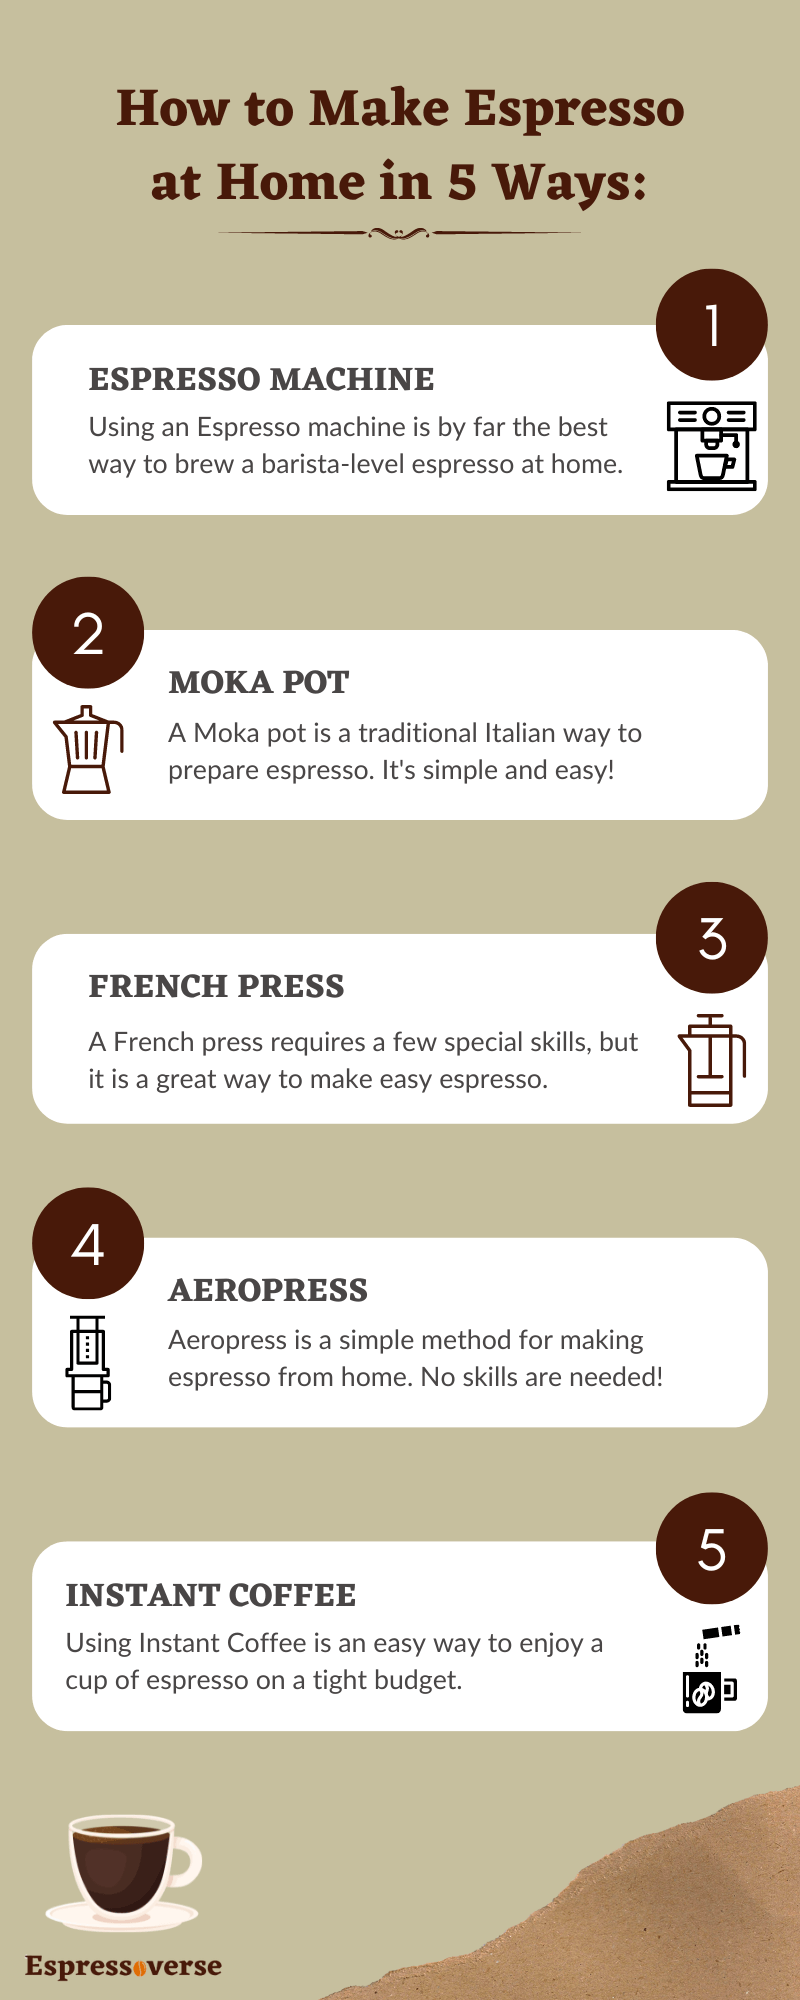 How to Make Espresso at Home Infographic